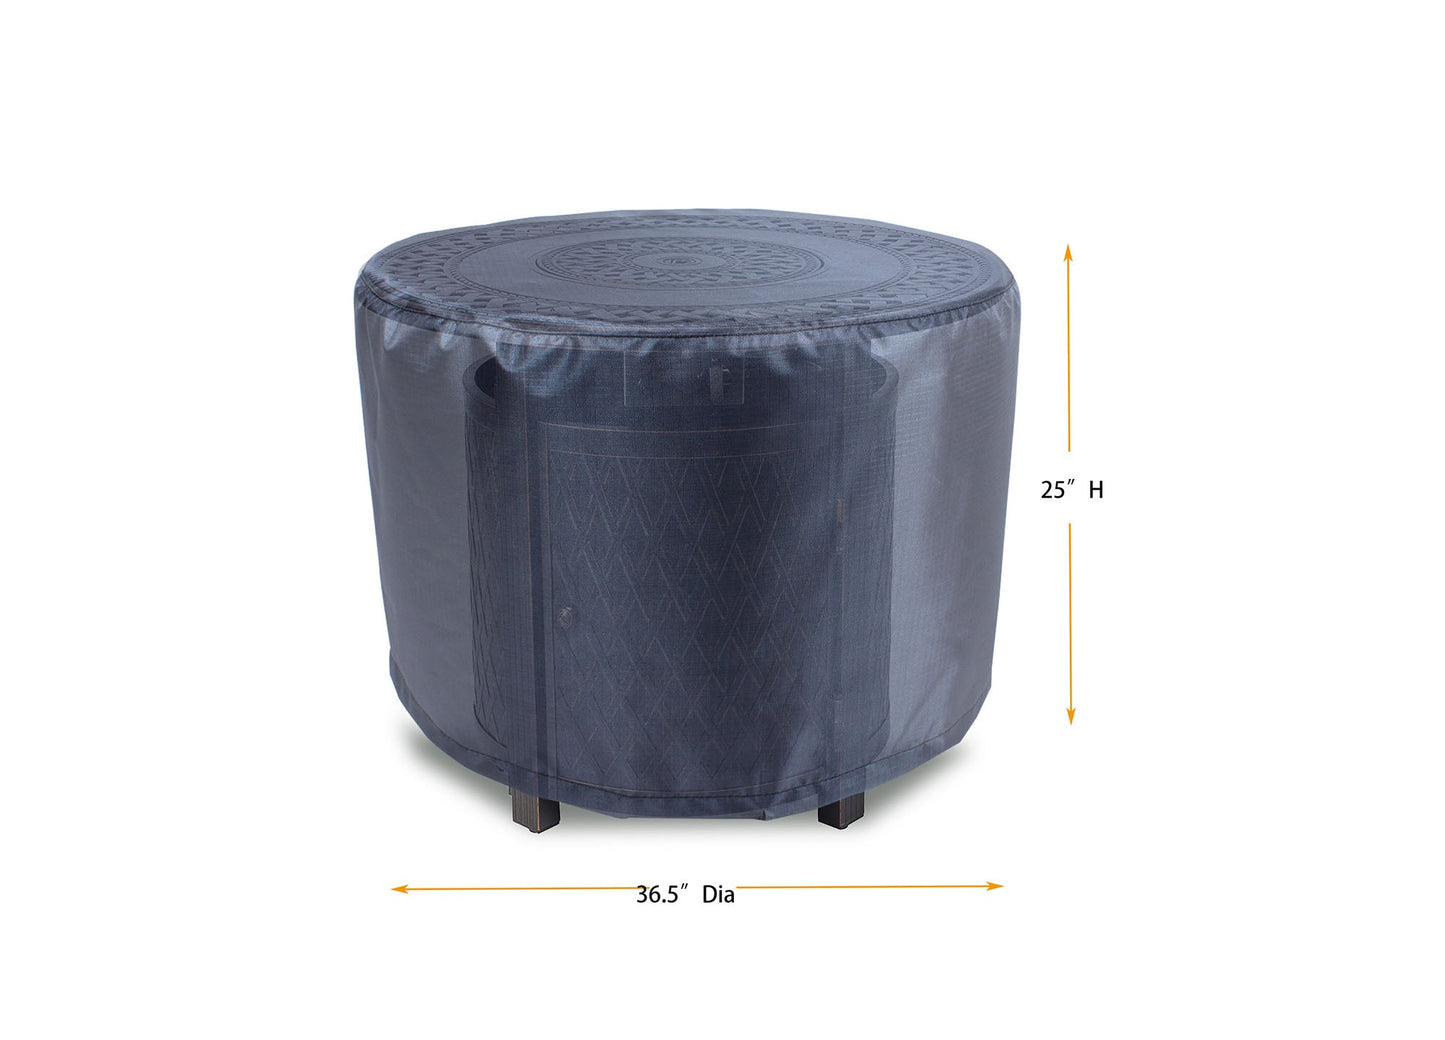 Round Fire Table Cover - DIA36.5''x25''H  - Mercury